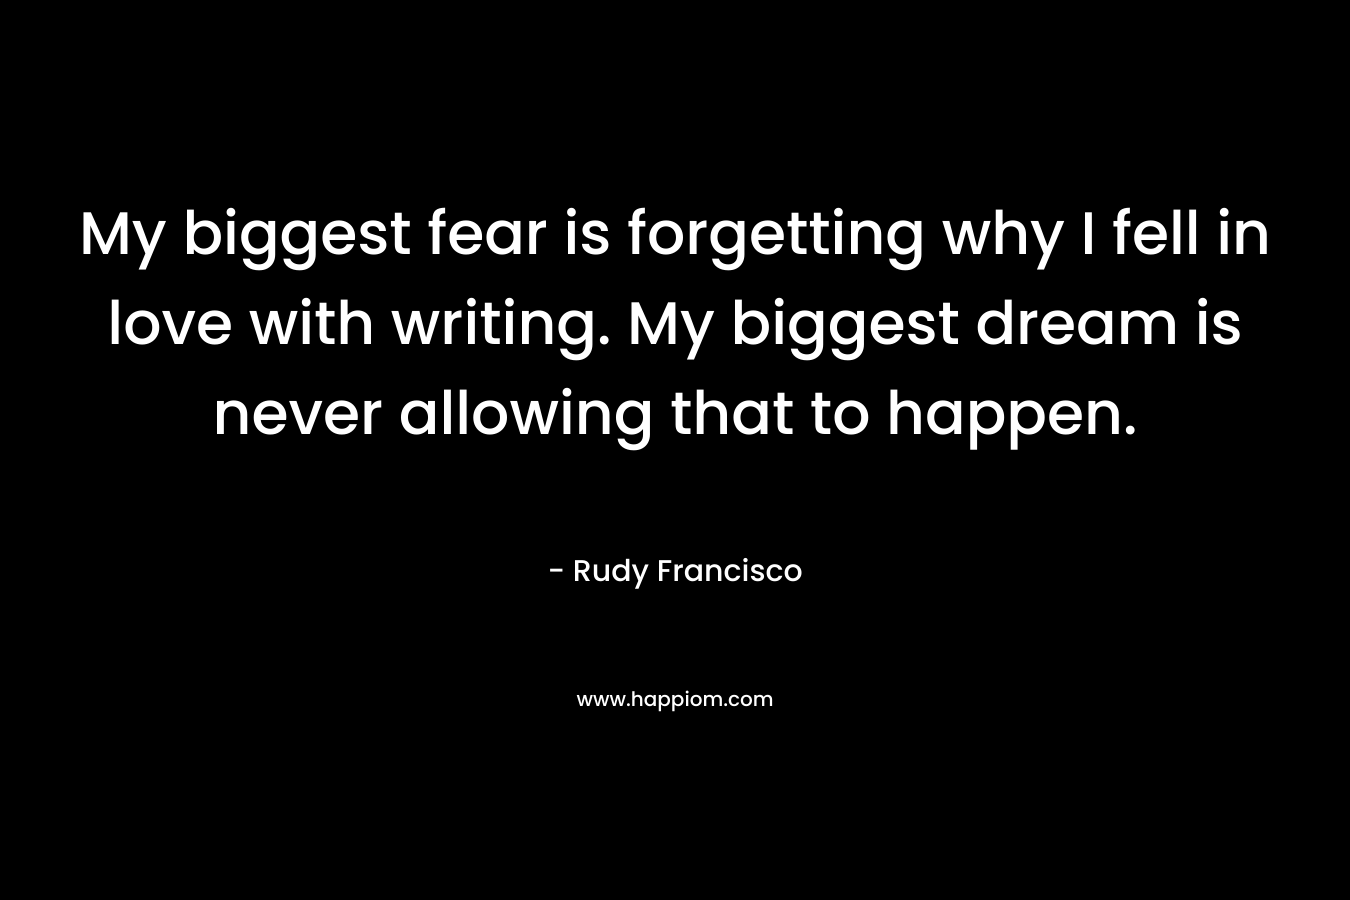 My biggest fear is forgetting why I fell in love with writing. My biggest dream is never allowing that to happen.